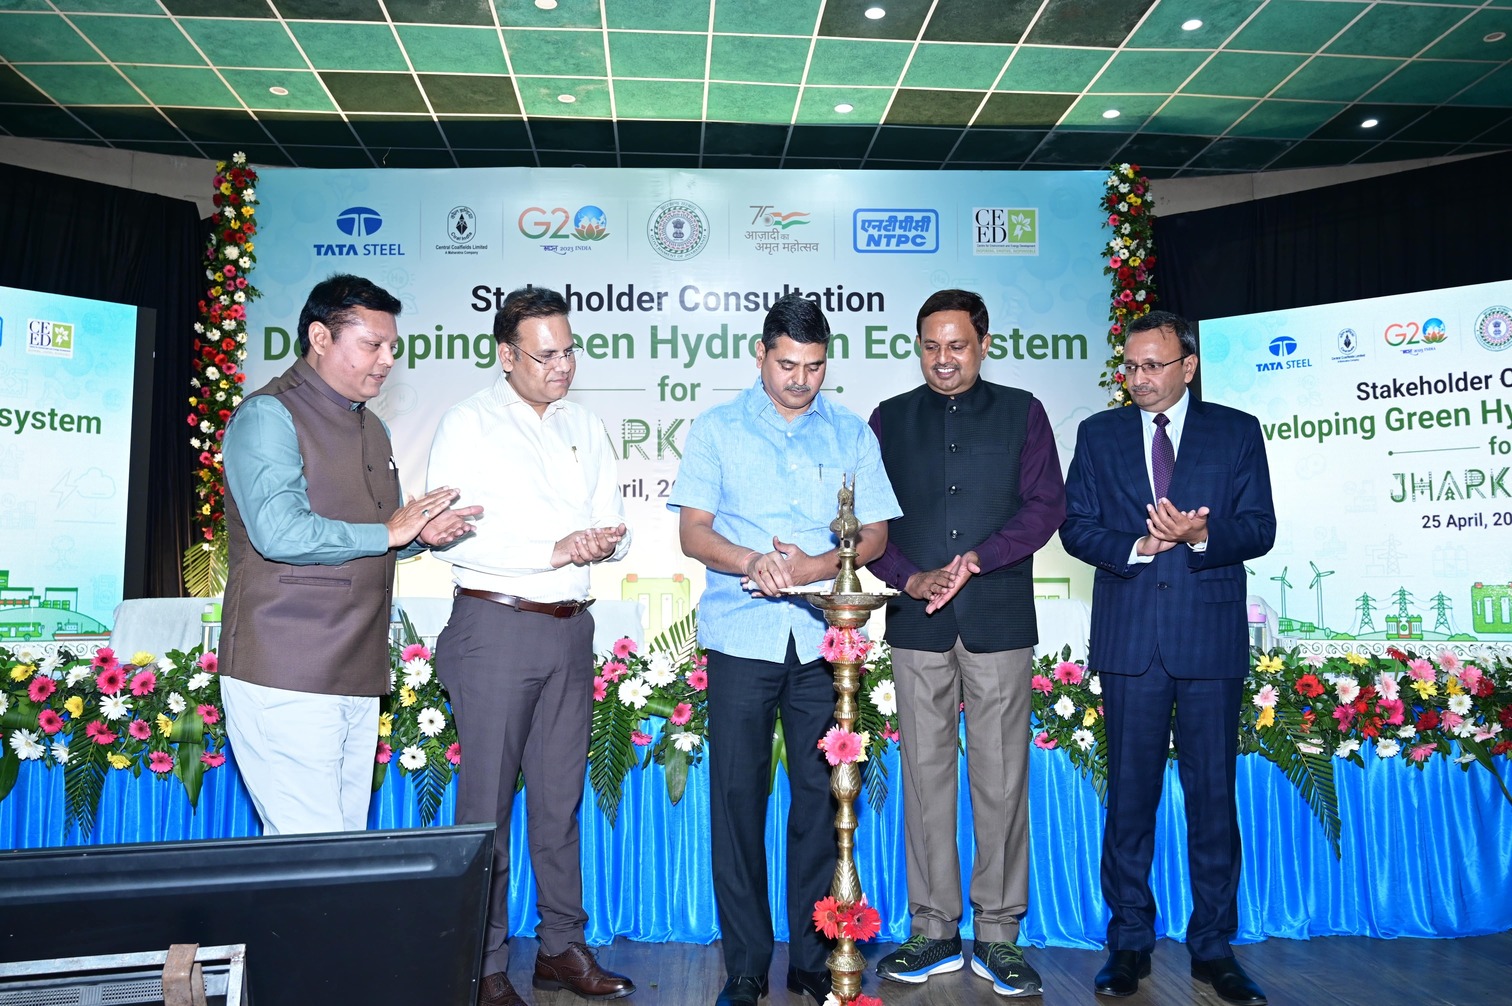 Developing Green Hydrogen Ecosystem for Jharkhand